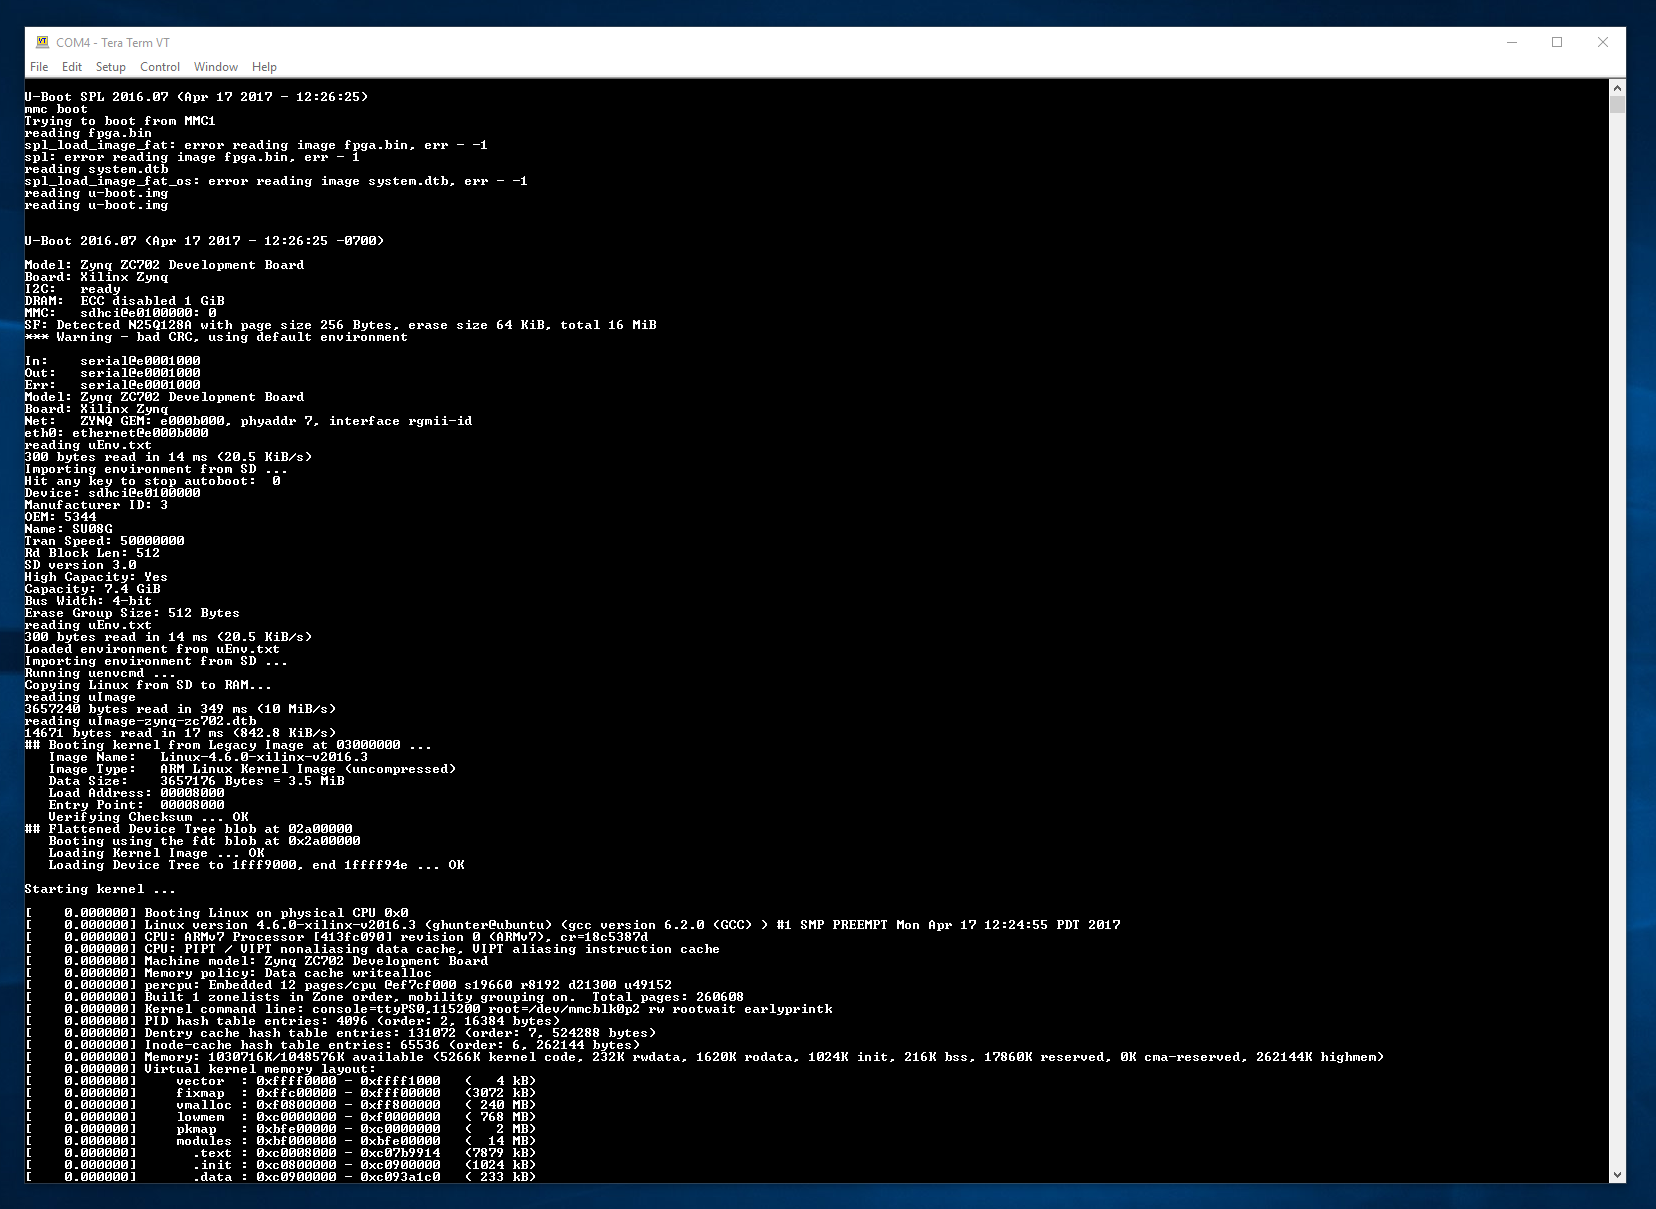 The terminal output during the start of a Linux boot built using Yocty, and running on the Xilinx ZC702 dev. board.